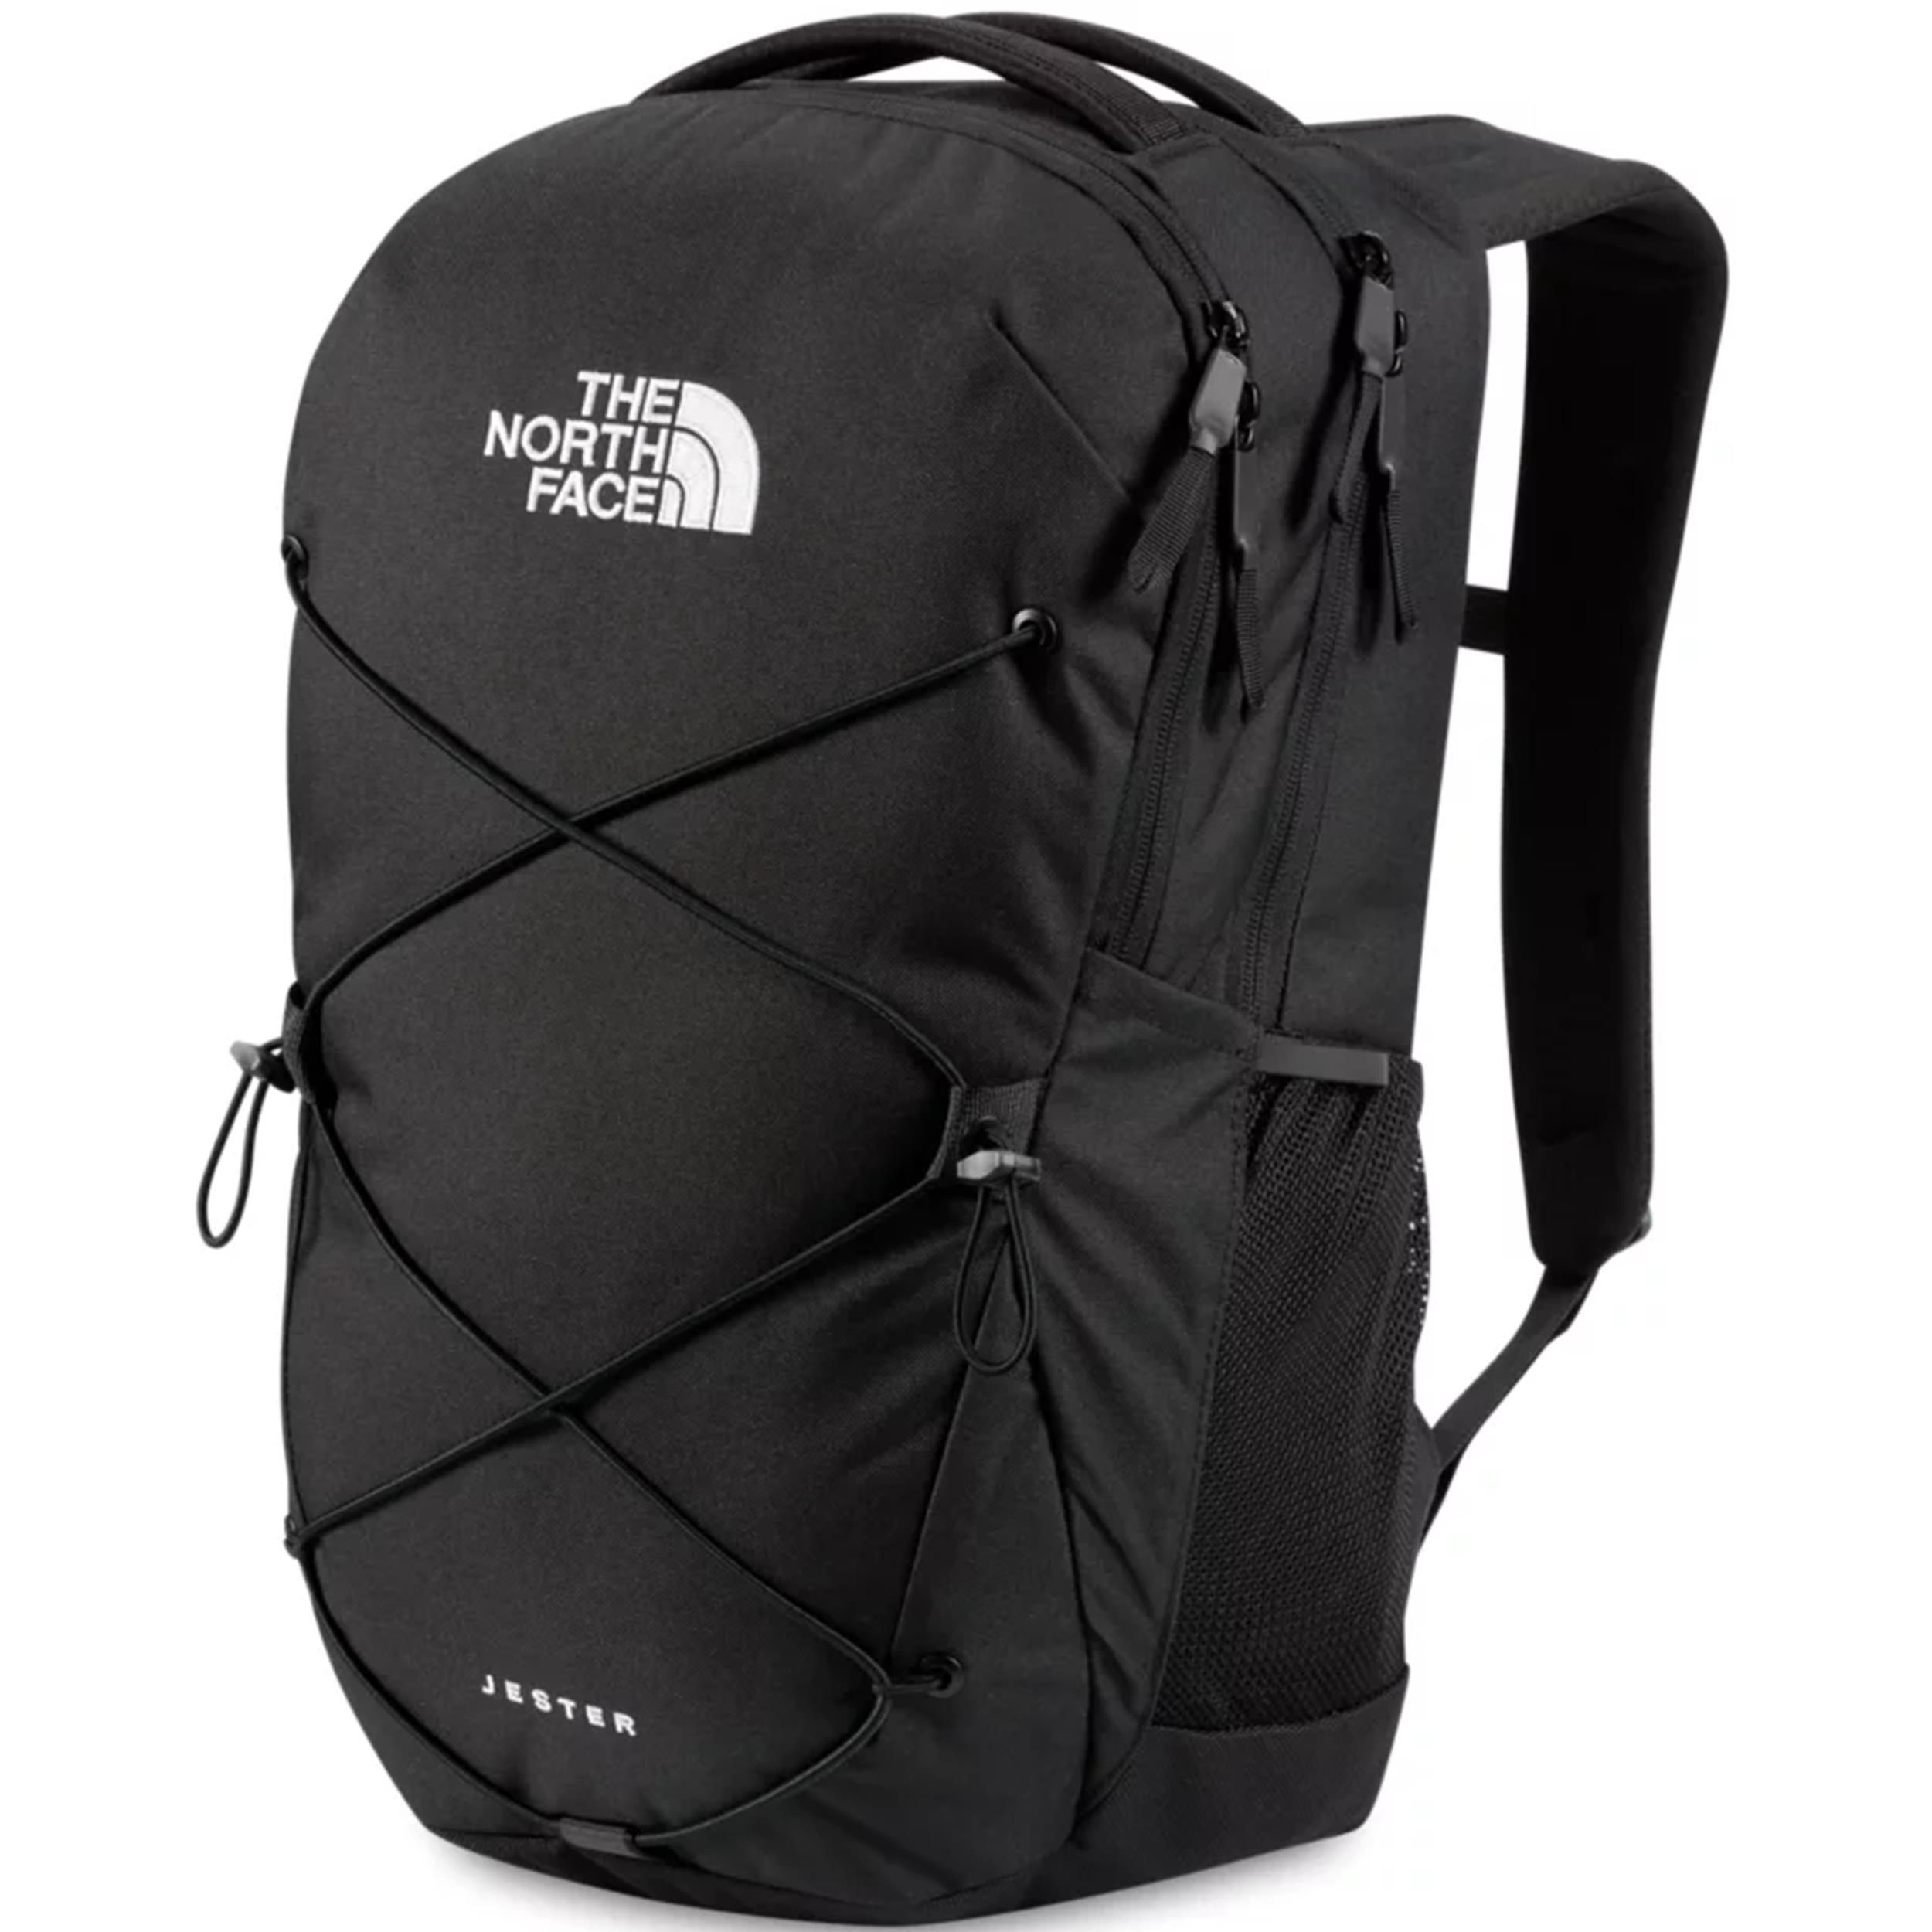 The North Face ® 28-Liter Jester Backpack 11" x 8.25" x 18.13"